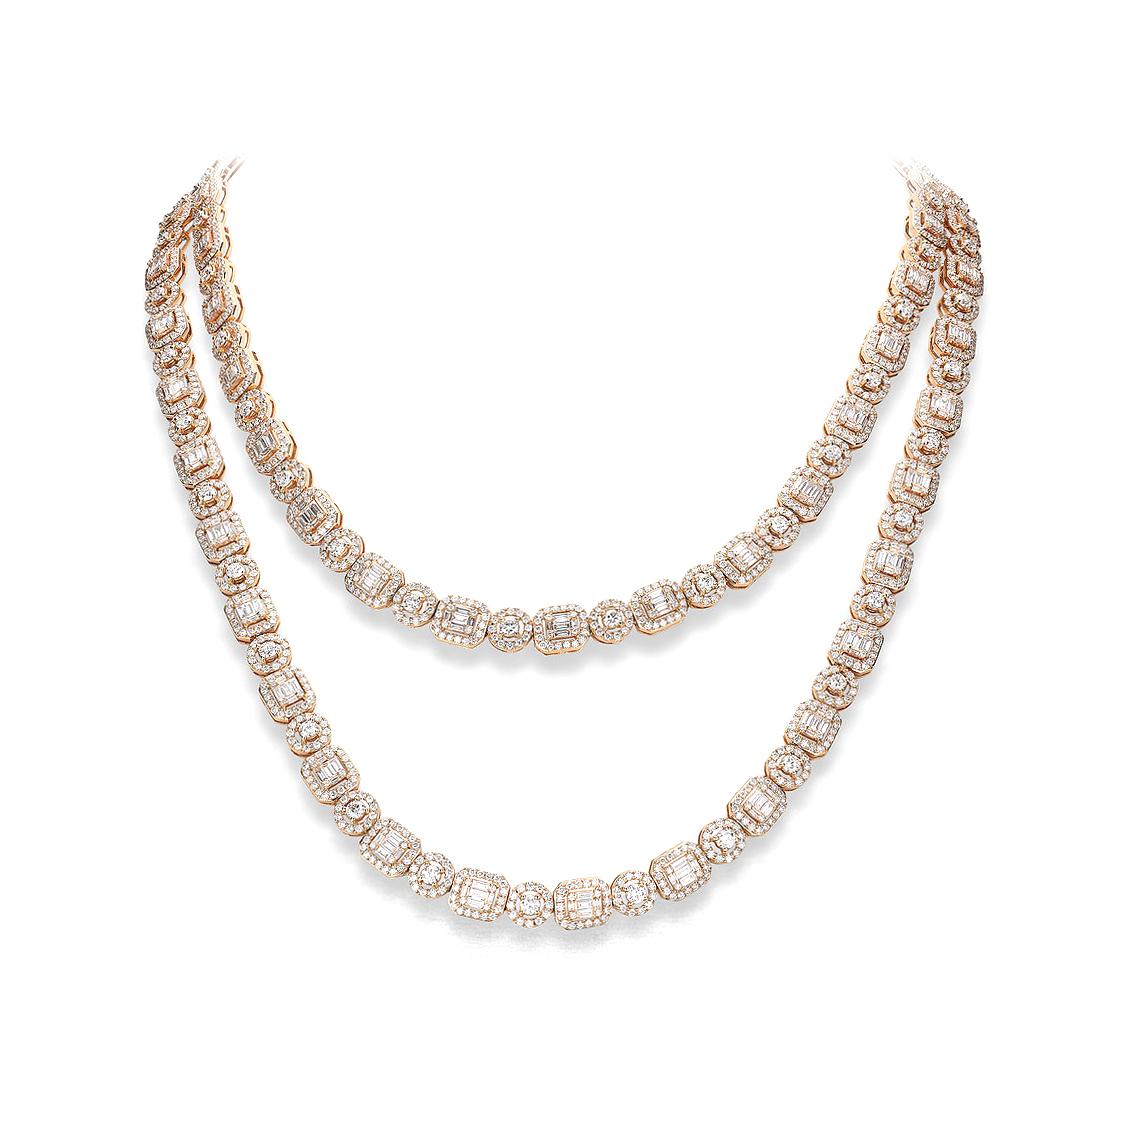 Necklace in 18kt pink gold set with 310 baguette cut diamonds 5.14 cts and 2170 diamonds 18.53 cts (97 cm) 

Total length: 97.00 cm.
Gross weight: 89.09 grams